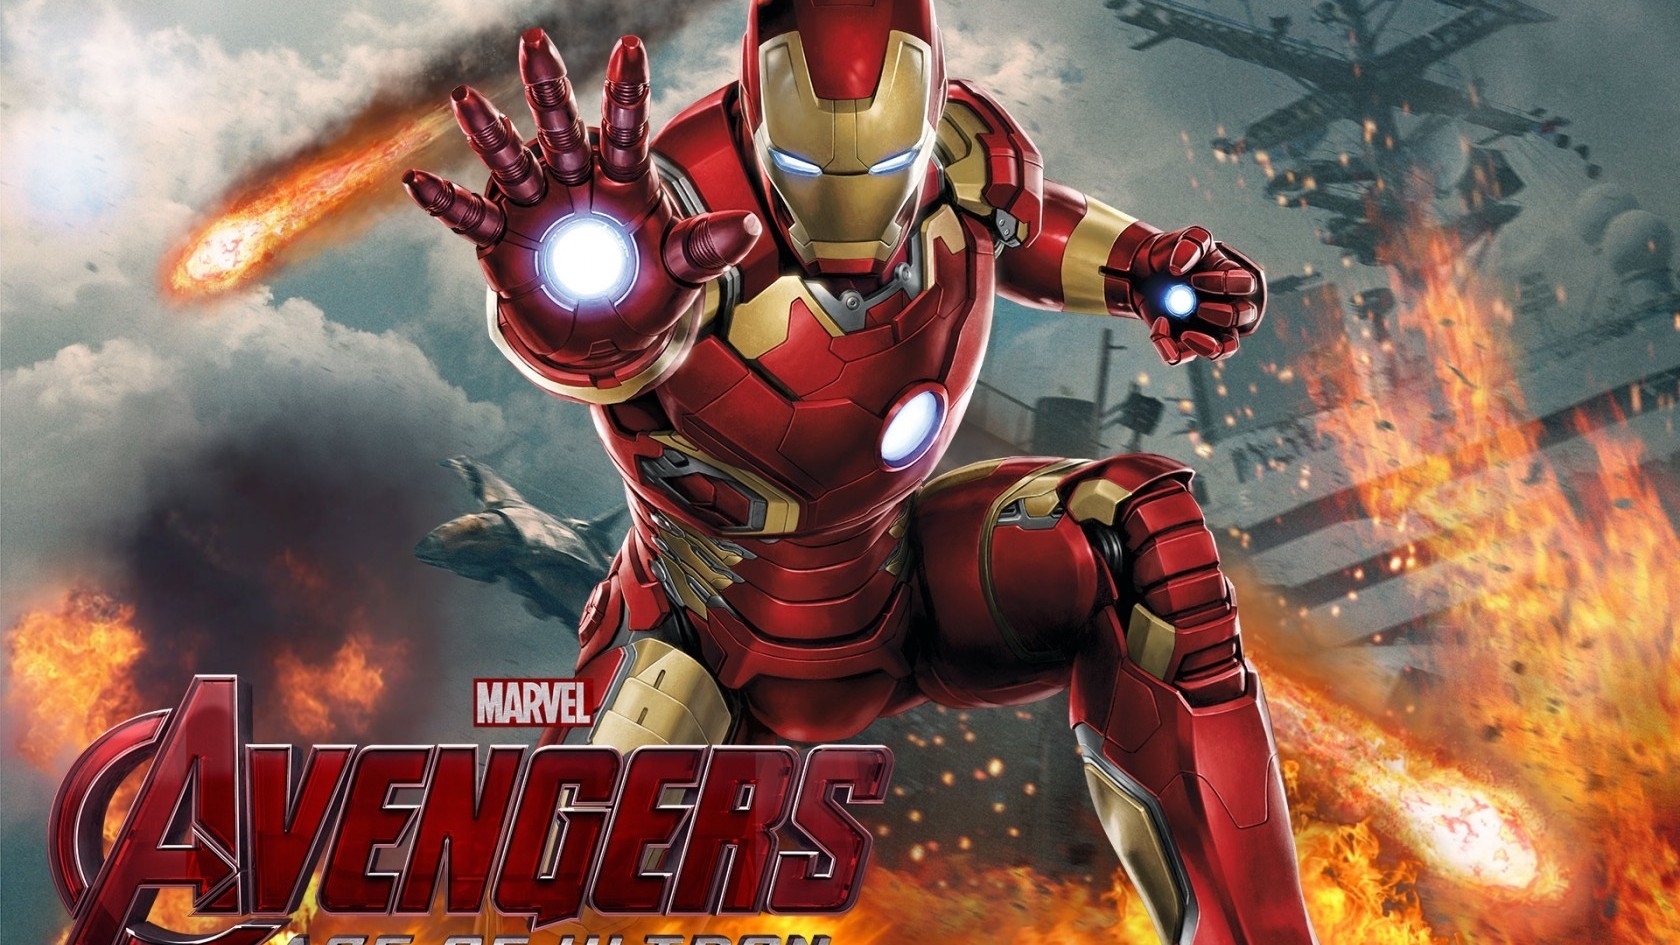 Iron Man The Avengers Movie for 1680 x 945 HDTV resolution